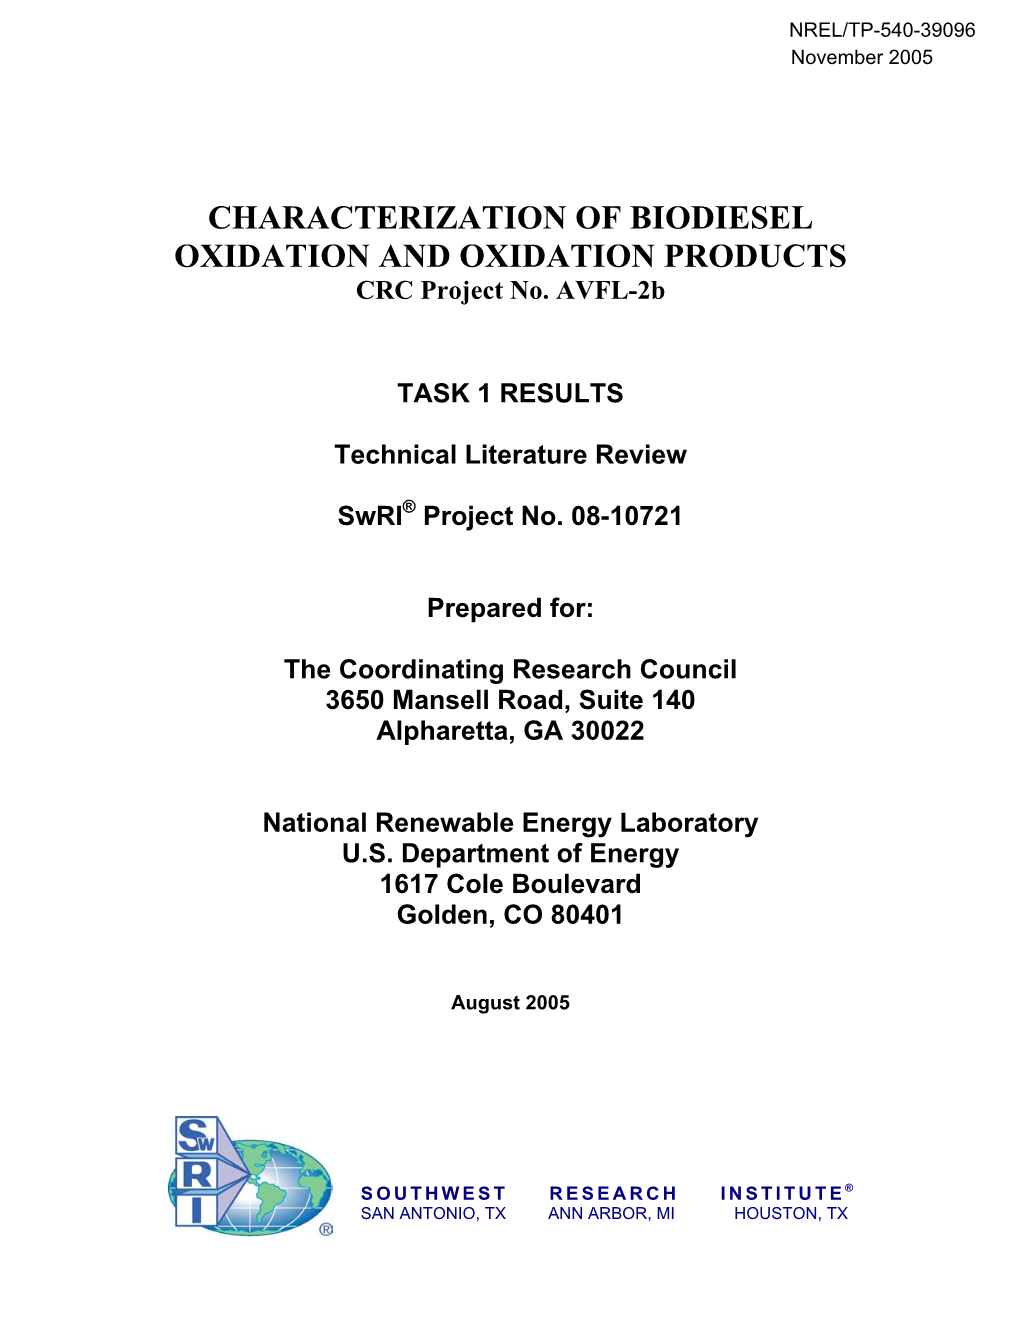 CHARACTERIZATION of BIODIESEL OXIDATION and OXIDATION PRODUCTS CRC Project No